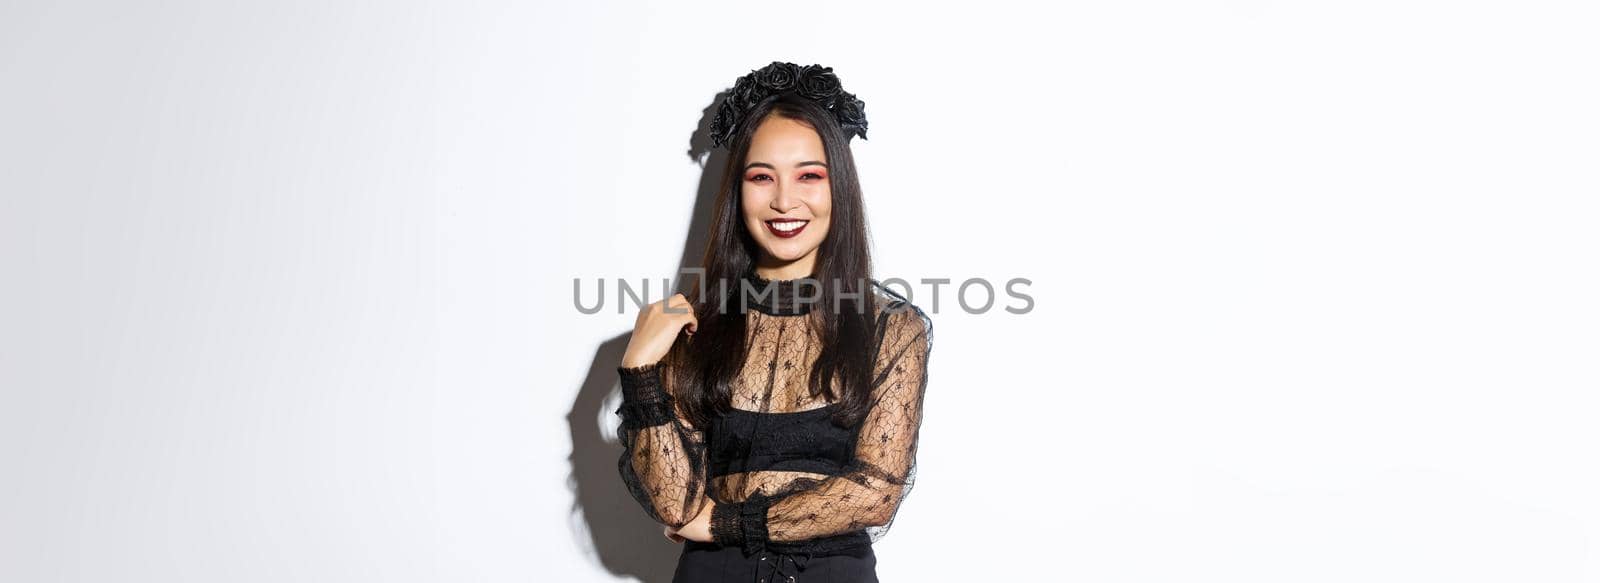 Beautiful young happy woman enjoying halloween party, smiling and looking cheerful while wearing her evil witch costume for trick or treating, standing over white background.